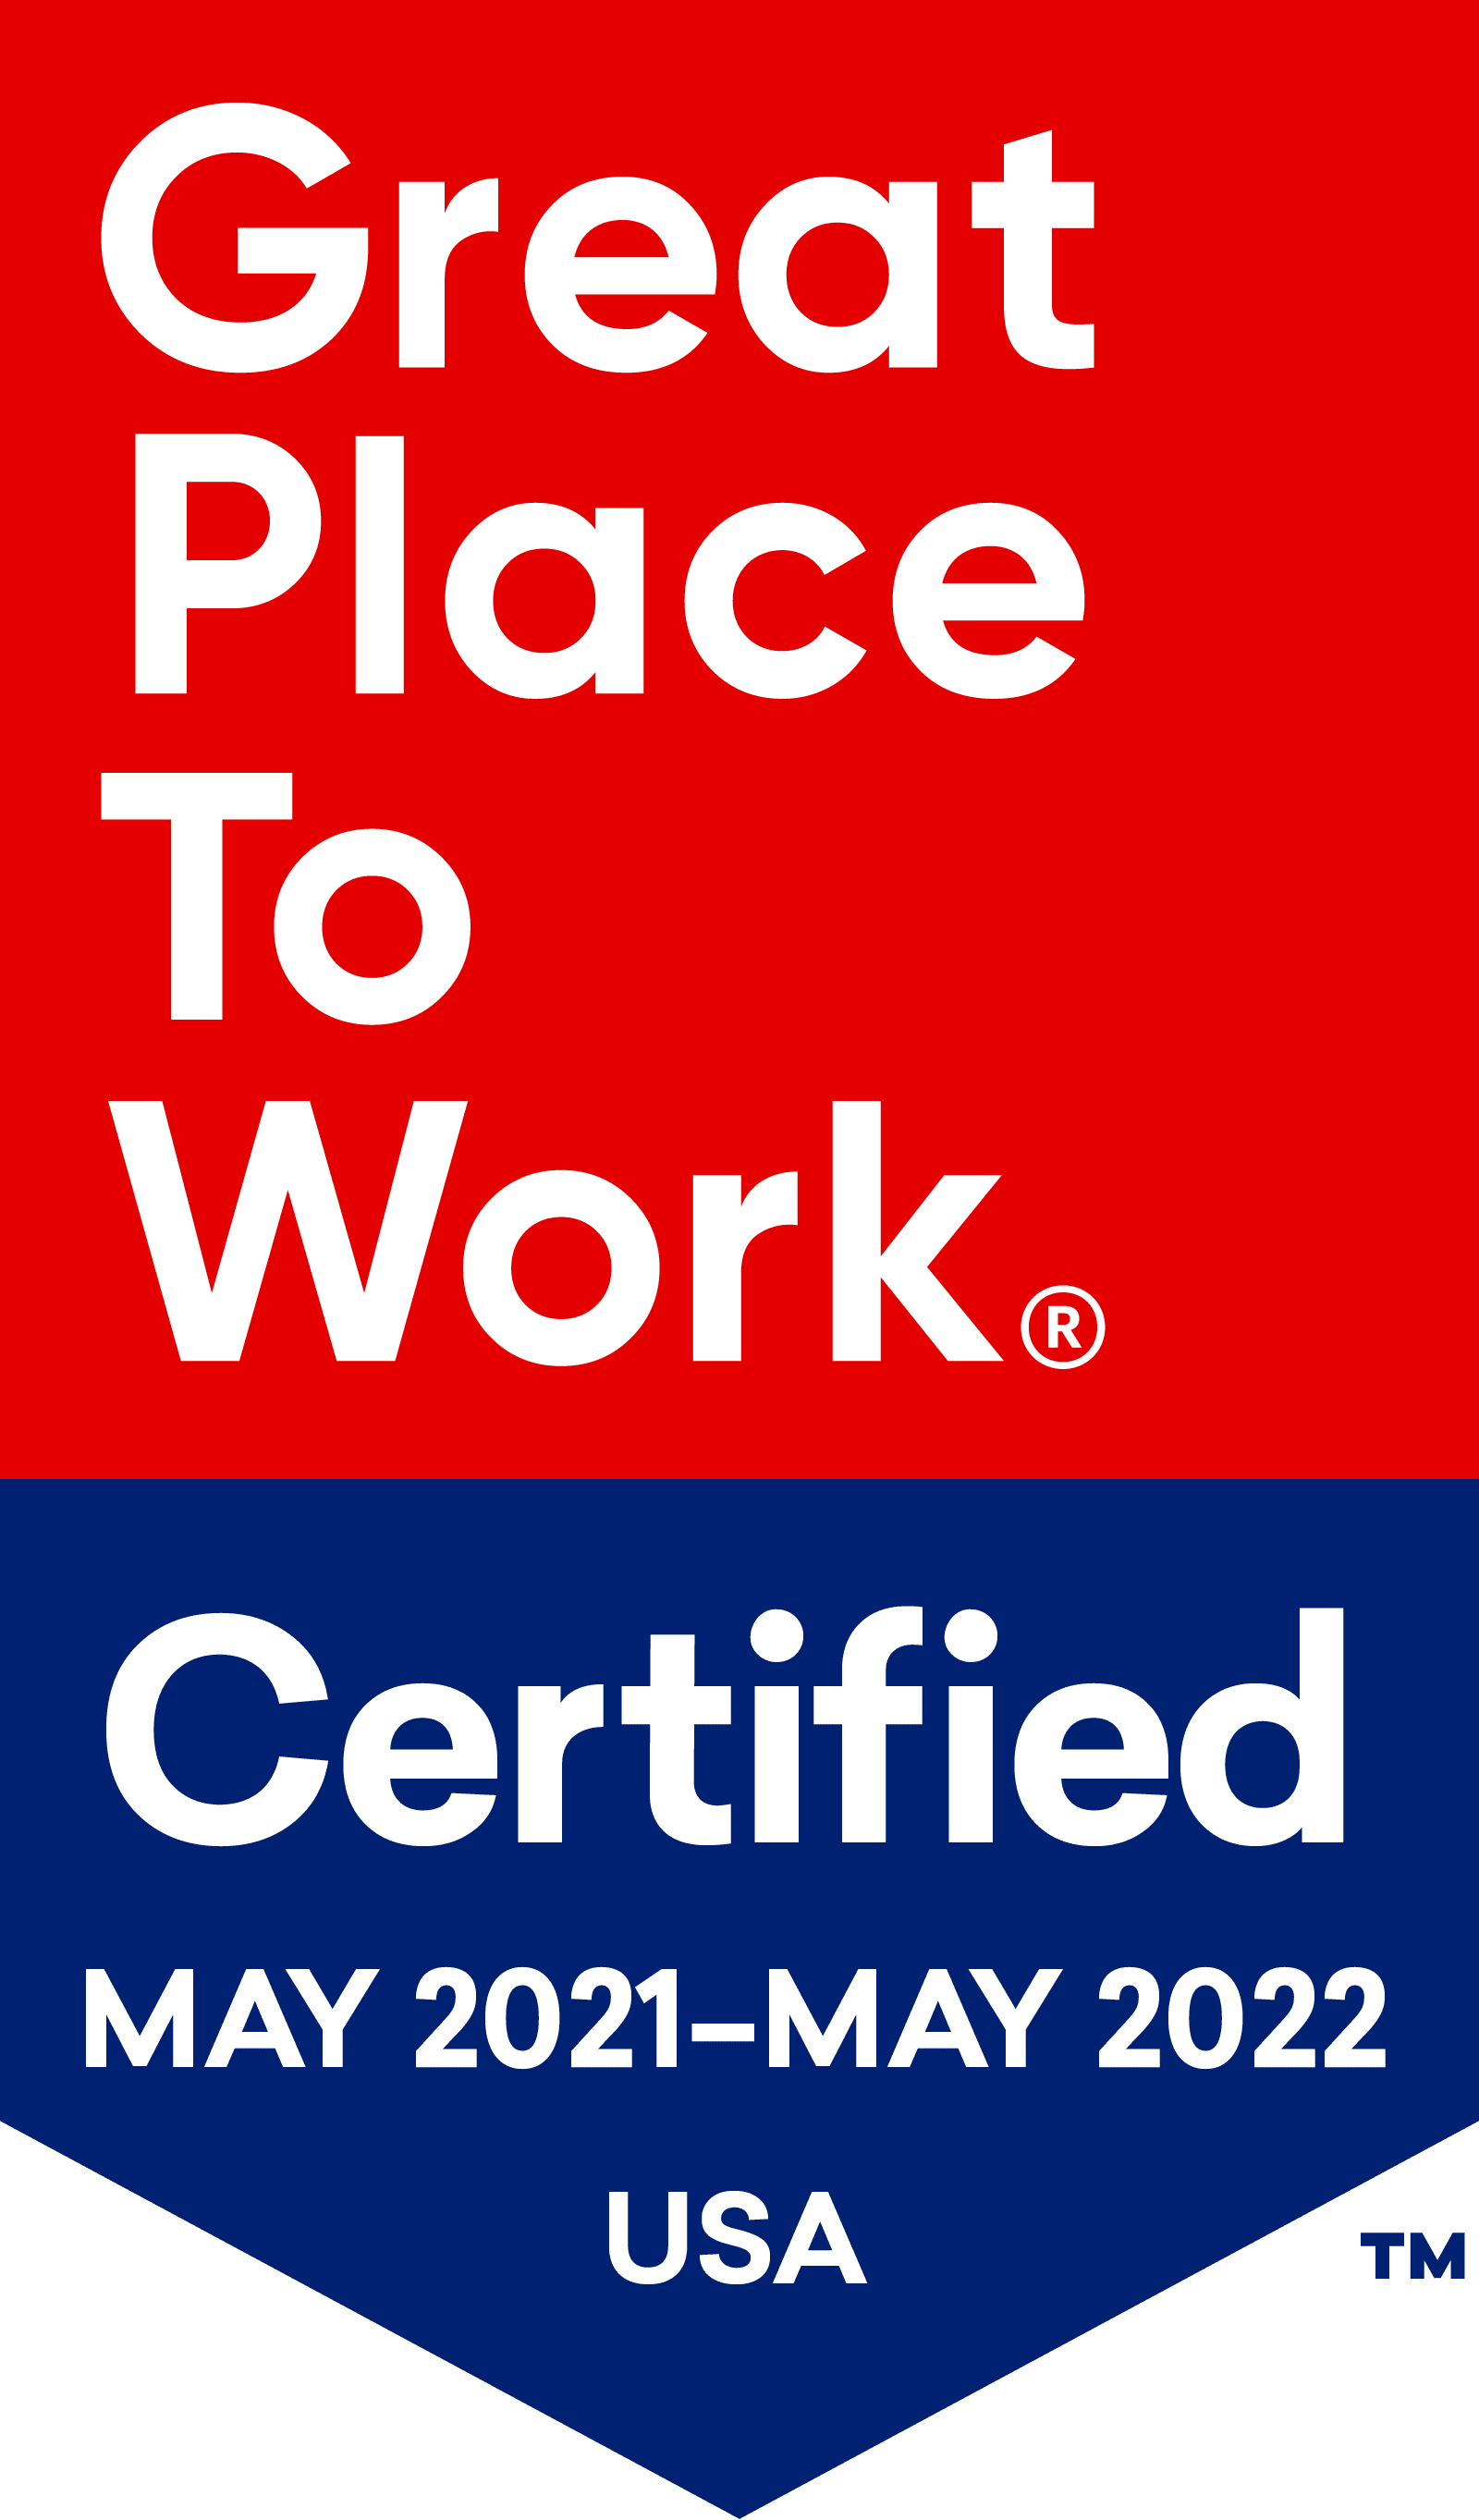 Dale Commons is Great Place To Work Certified